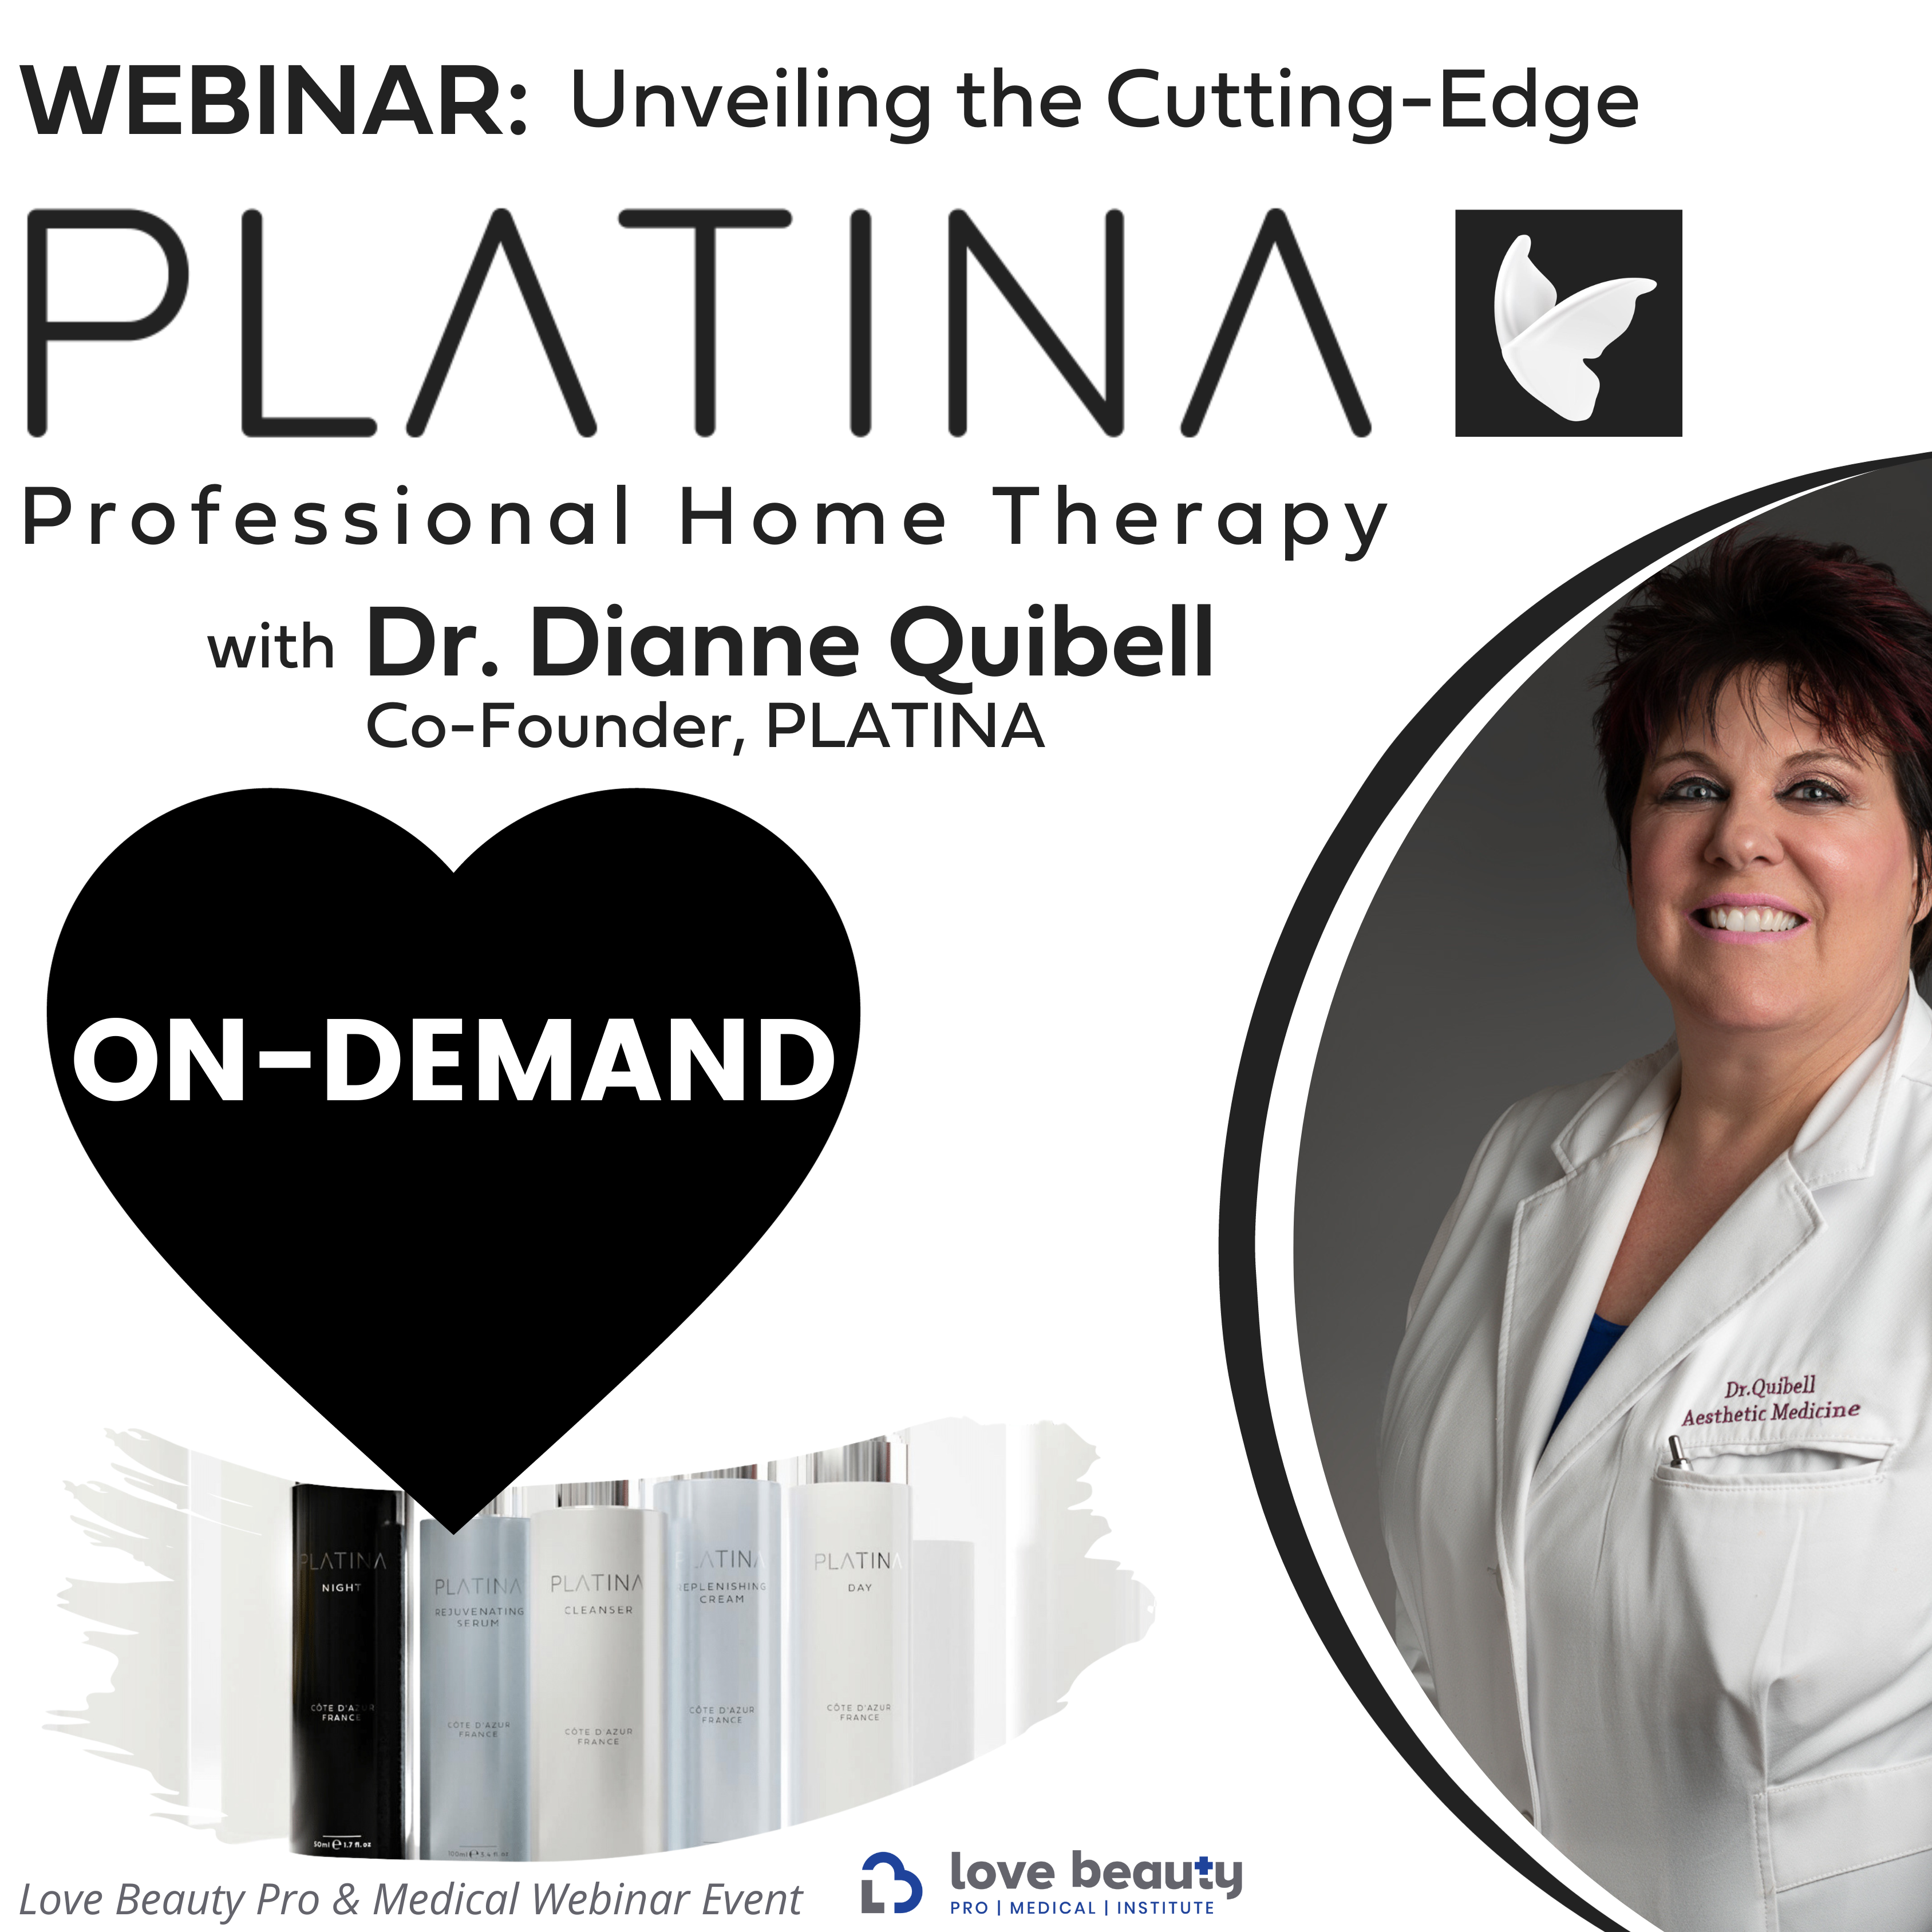 ON-DEMAND WEBINAR Unveiling the Cutting-Edge PLATINA Professional Skin Therapy System with Dr. Dianne Quibell